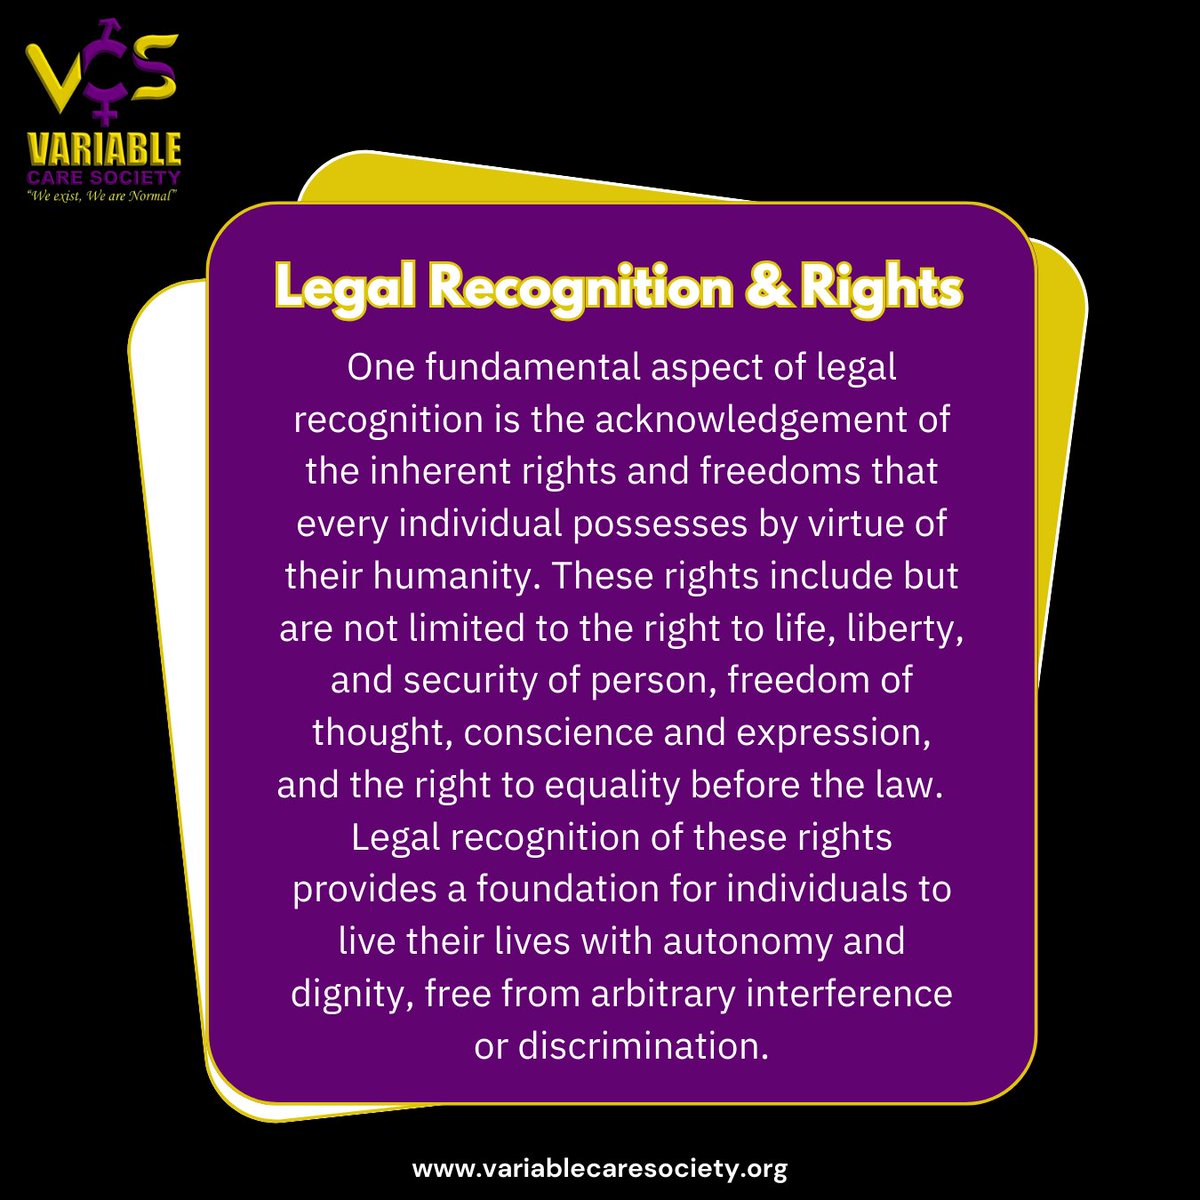 To enjoy the same rights as other individuals, stigma and discrimination based on sex and gender must be eliminated. 
#intersex 
#weexist 
#wearenormal 
#legalrecognition 
#intersexrights